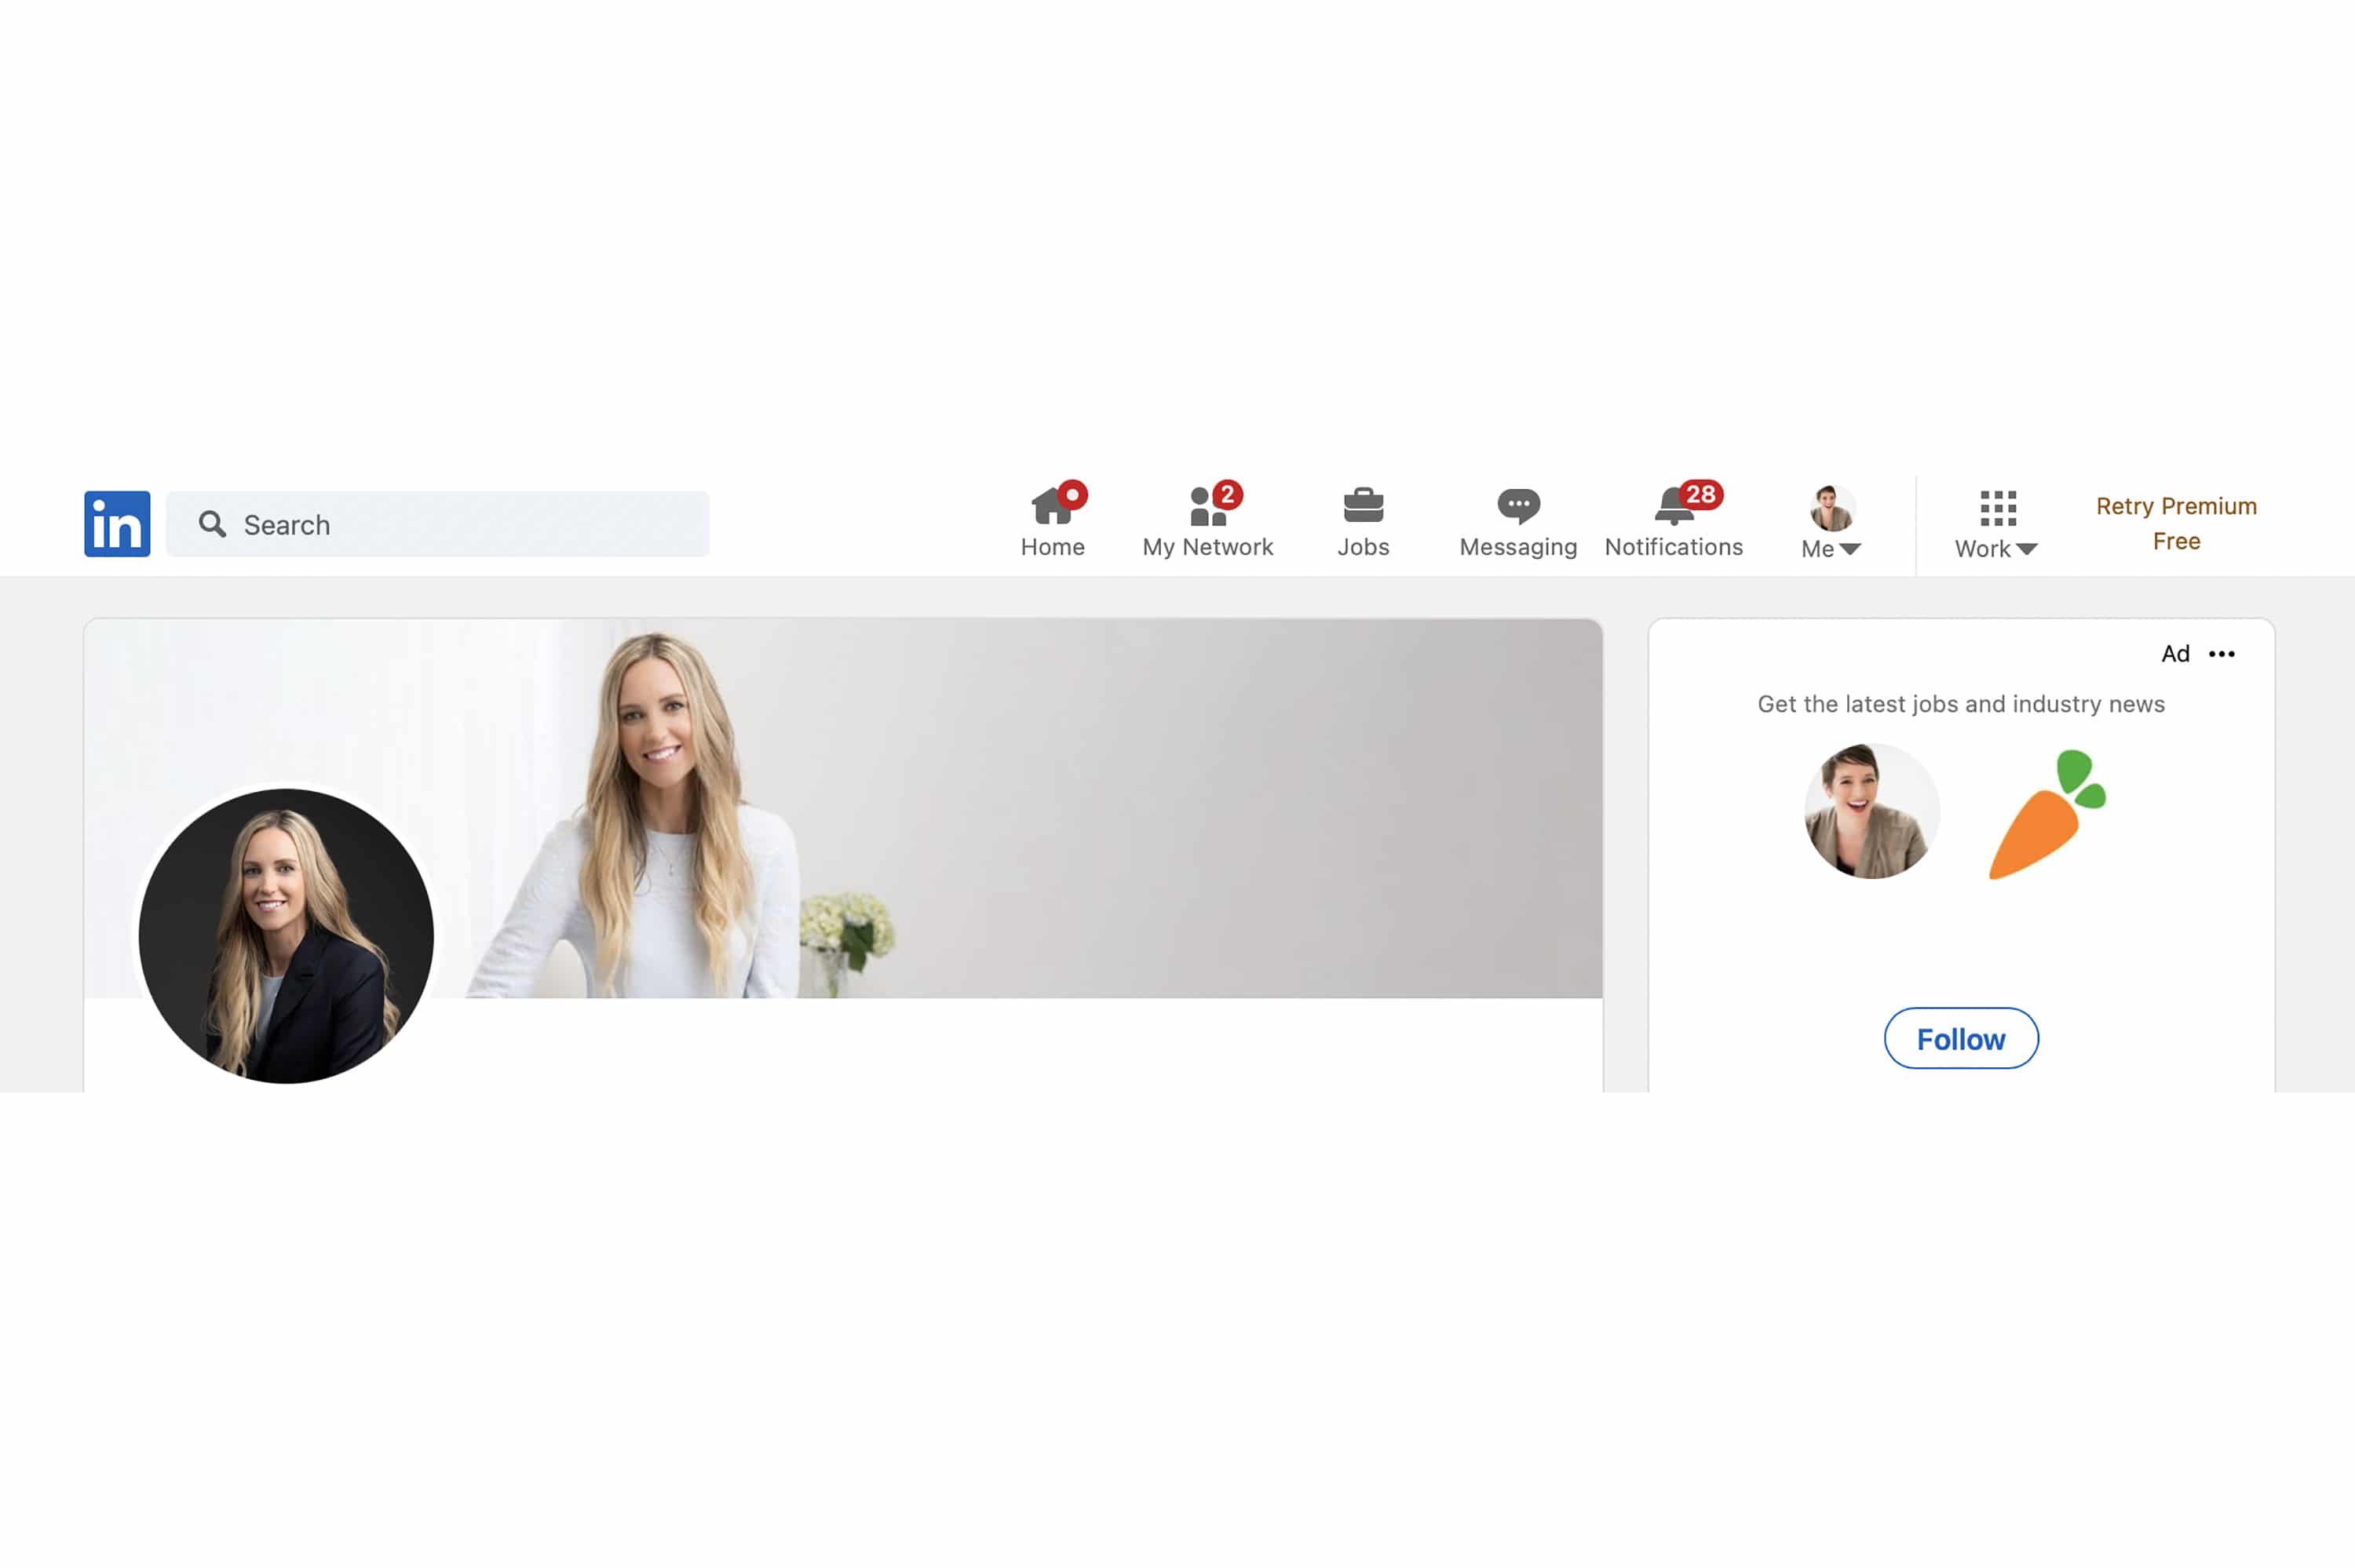 Photo showing portraits of a blonde women being used for a profile picture and banner on LinkedIn website.